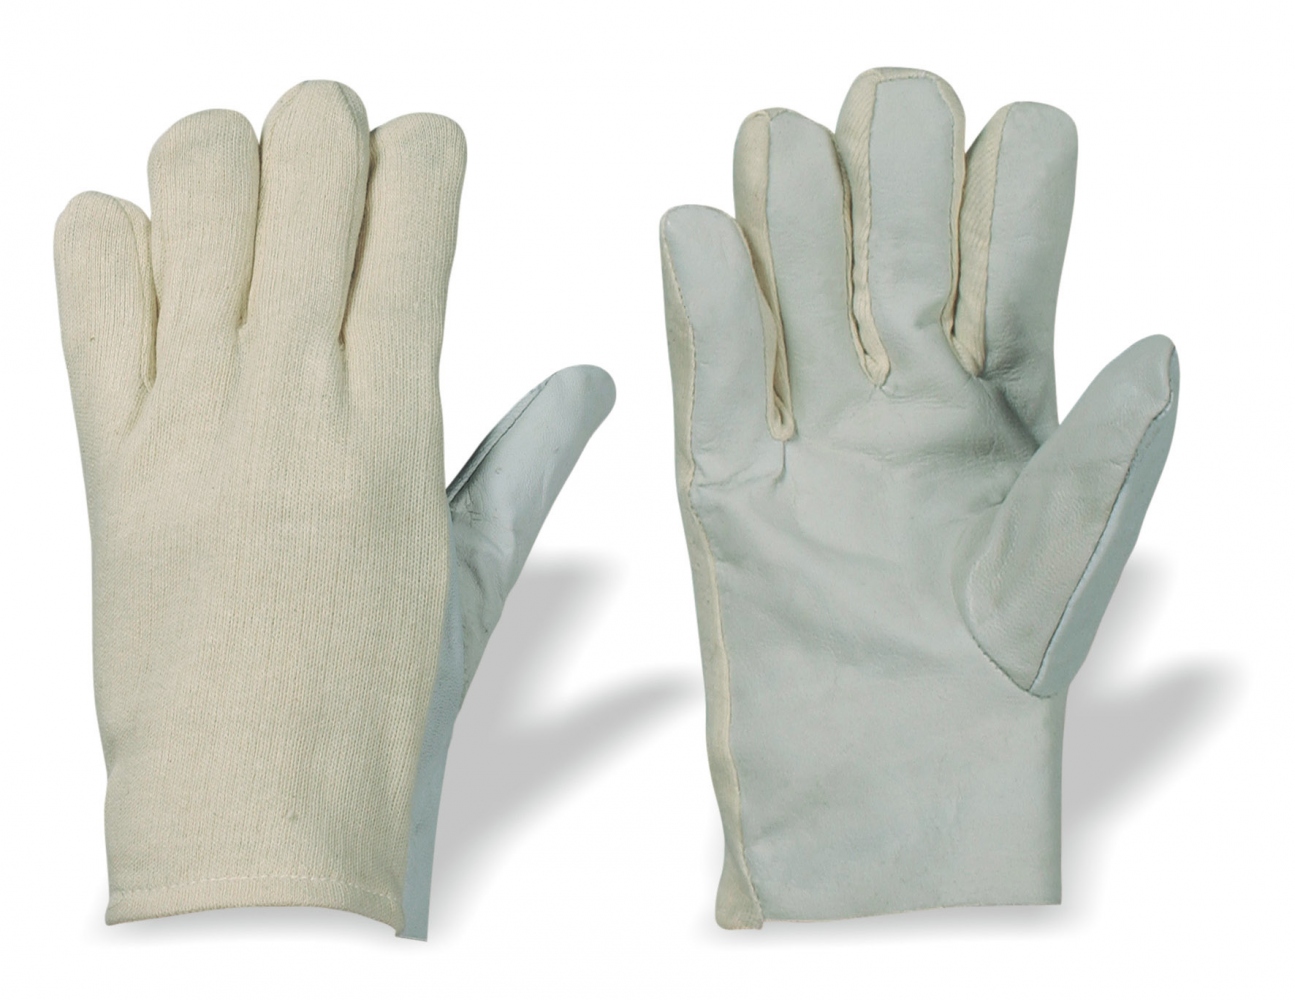 Nappa leather safety gloves